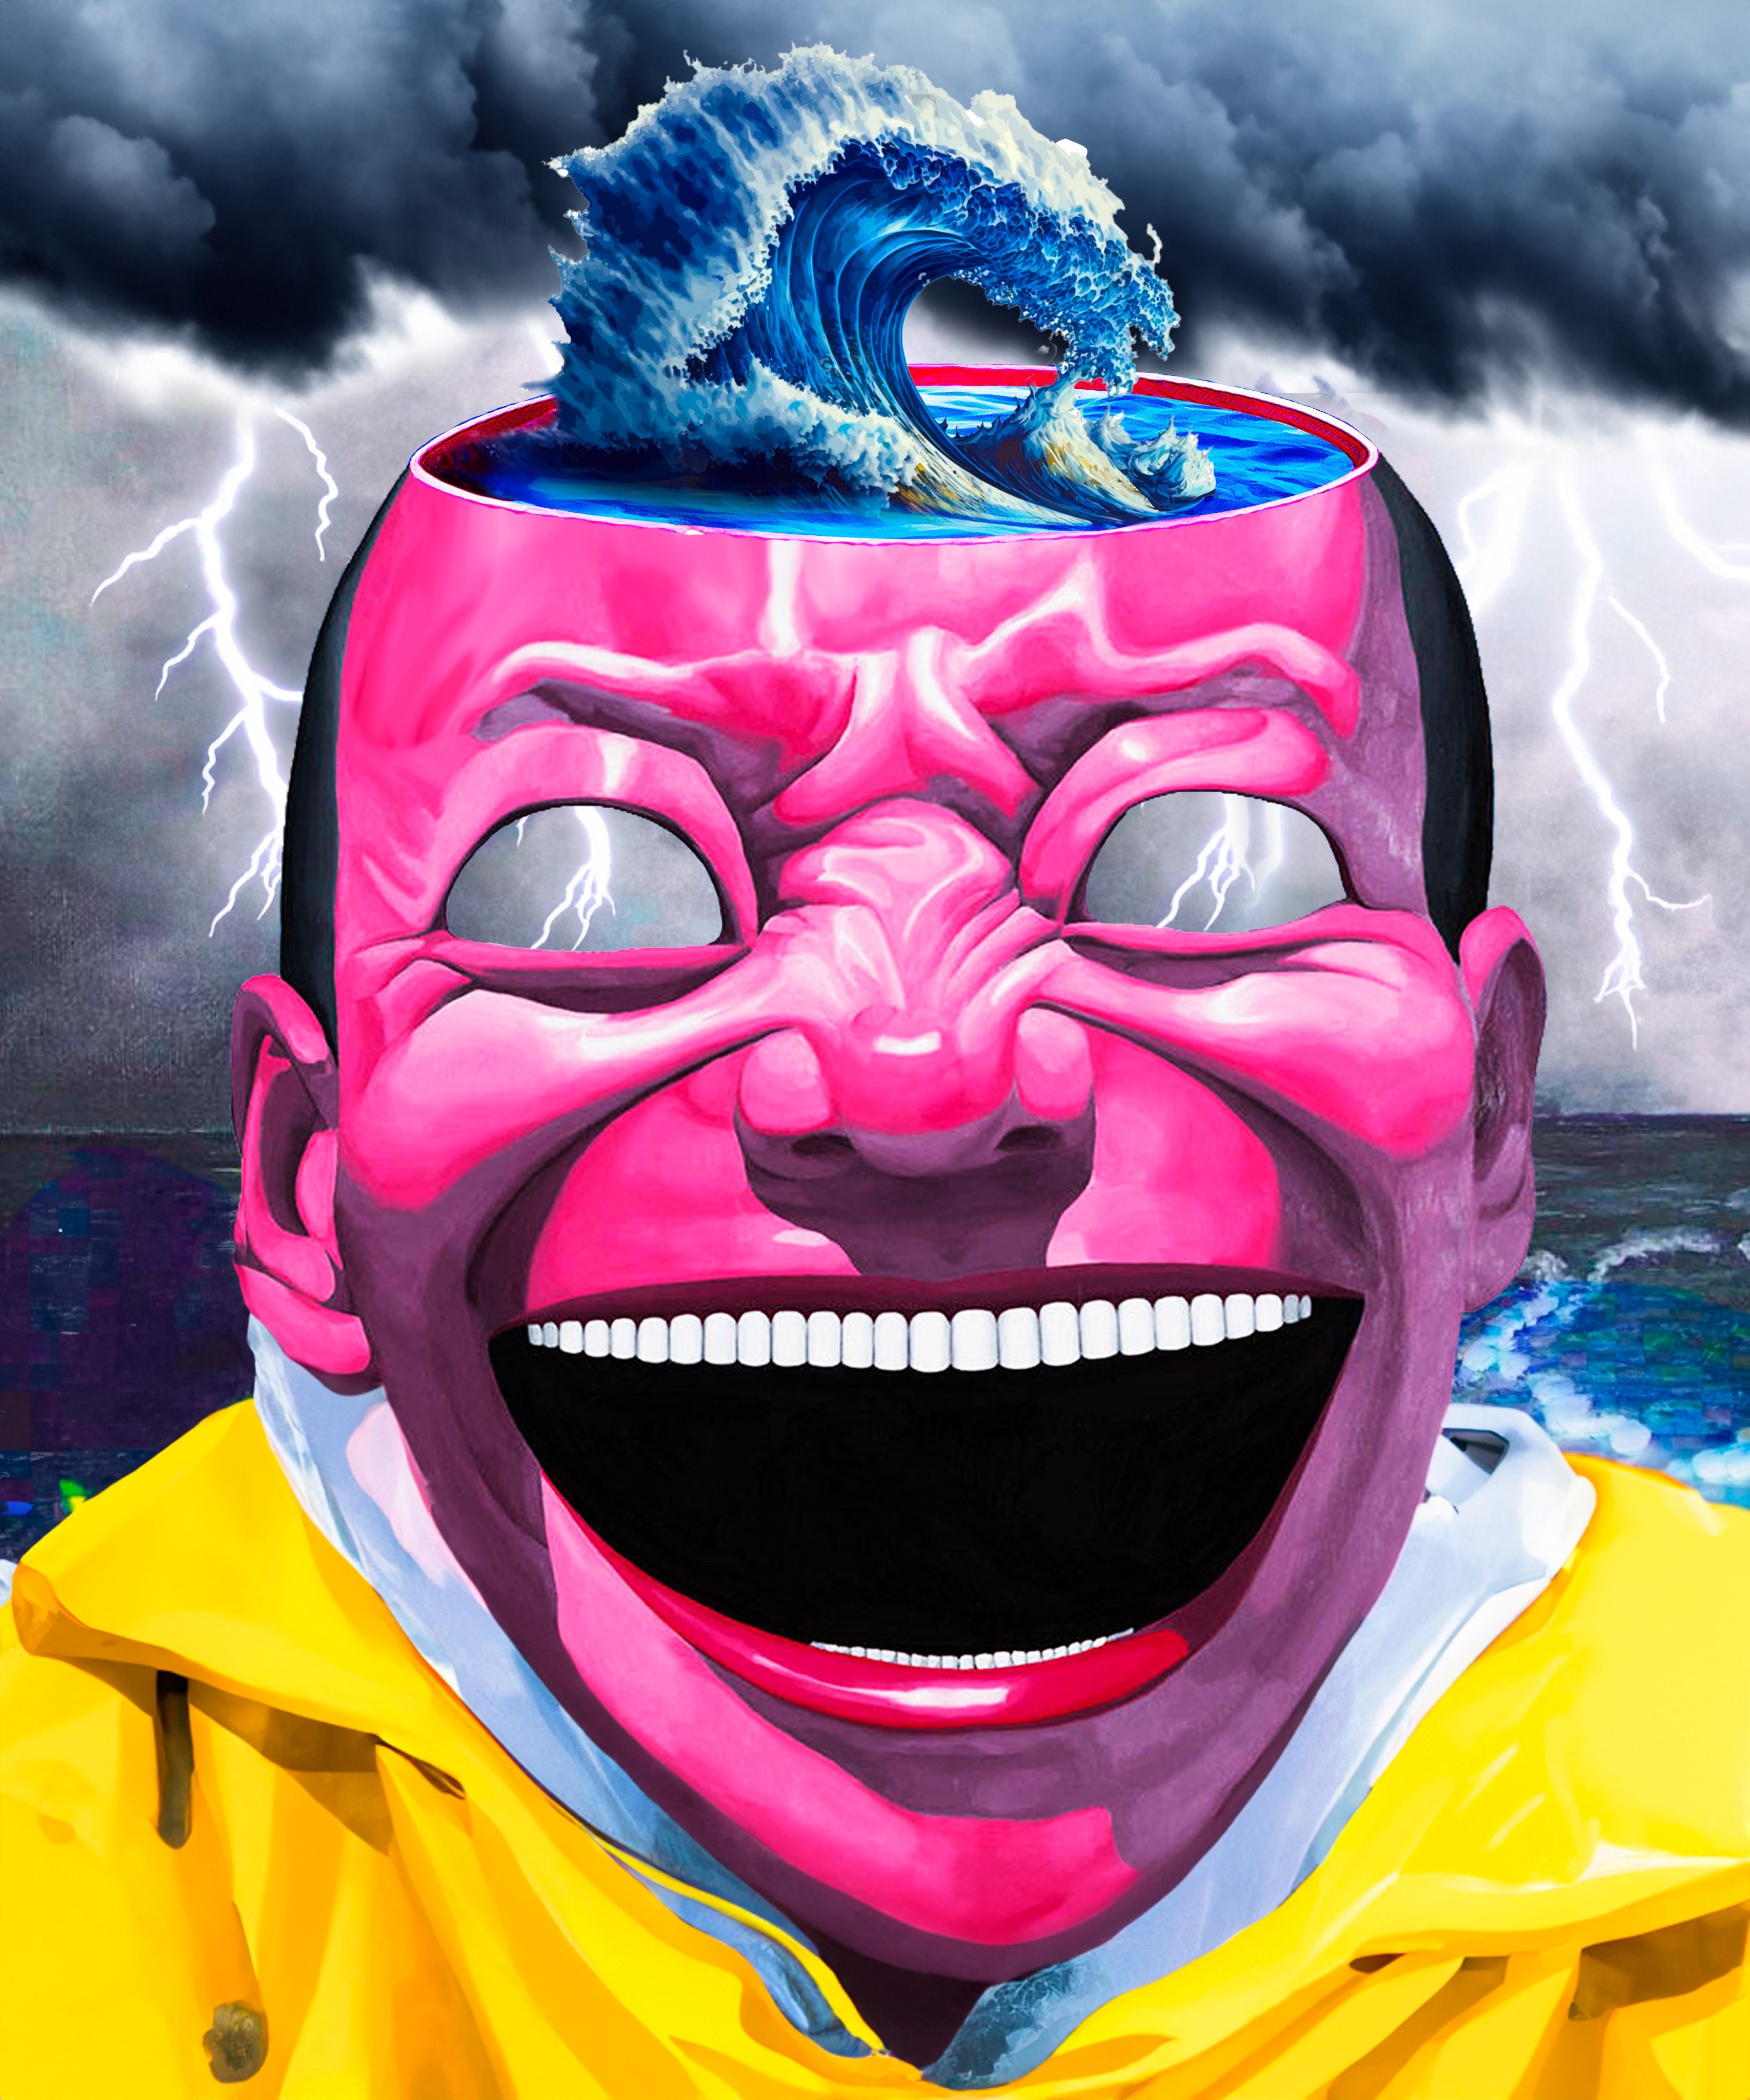 One of 1,200 generative NFT artworks, launched in August 2023, based on Chinese artist Yue Minjun’s Laughing Man self-portraits. Photo: Handout